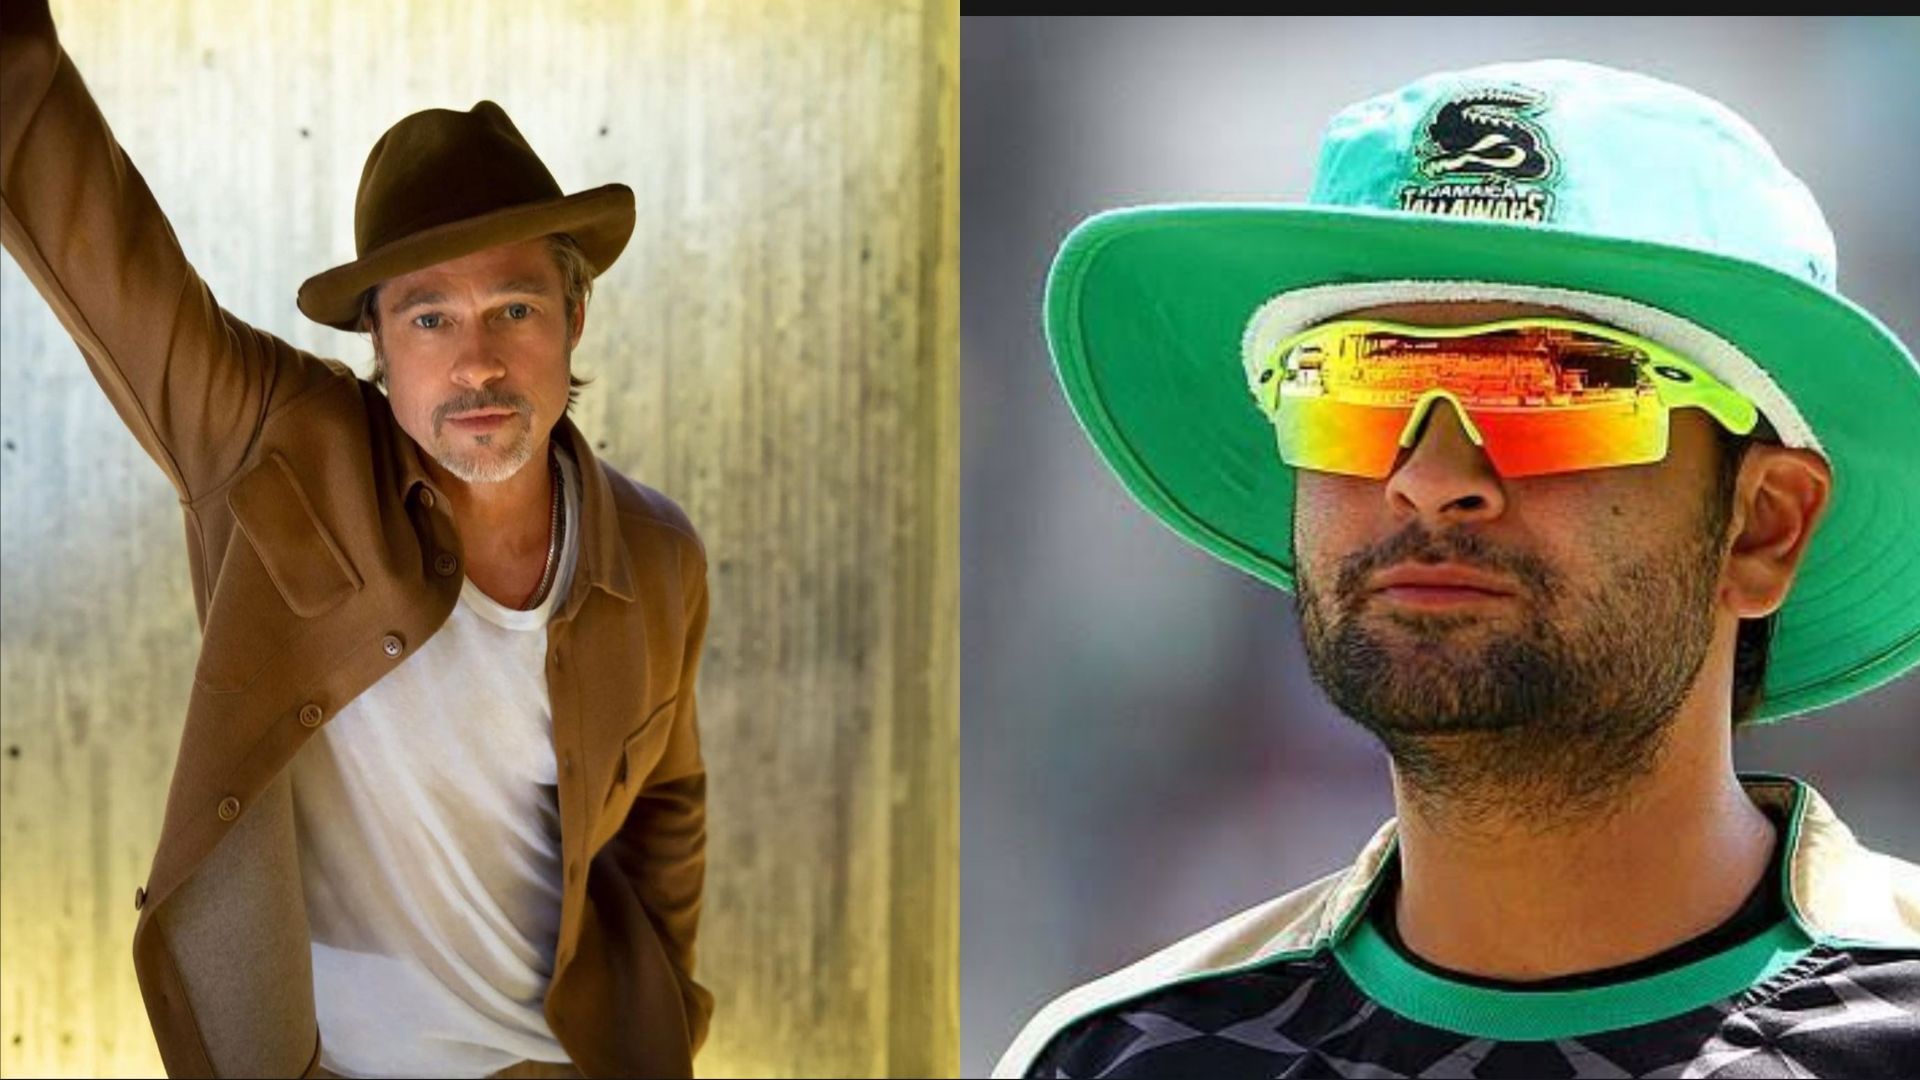 Pakistan cricketer Ahmed Shehzad recently said that he wants to see Brad Pitt play his role in his biopic (Image: Instagram)